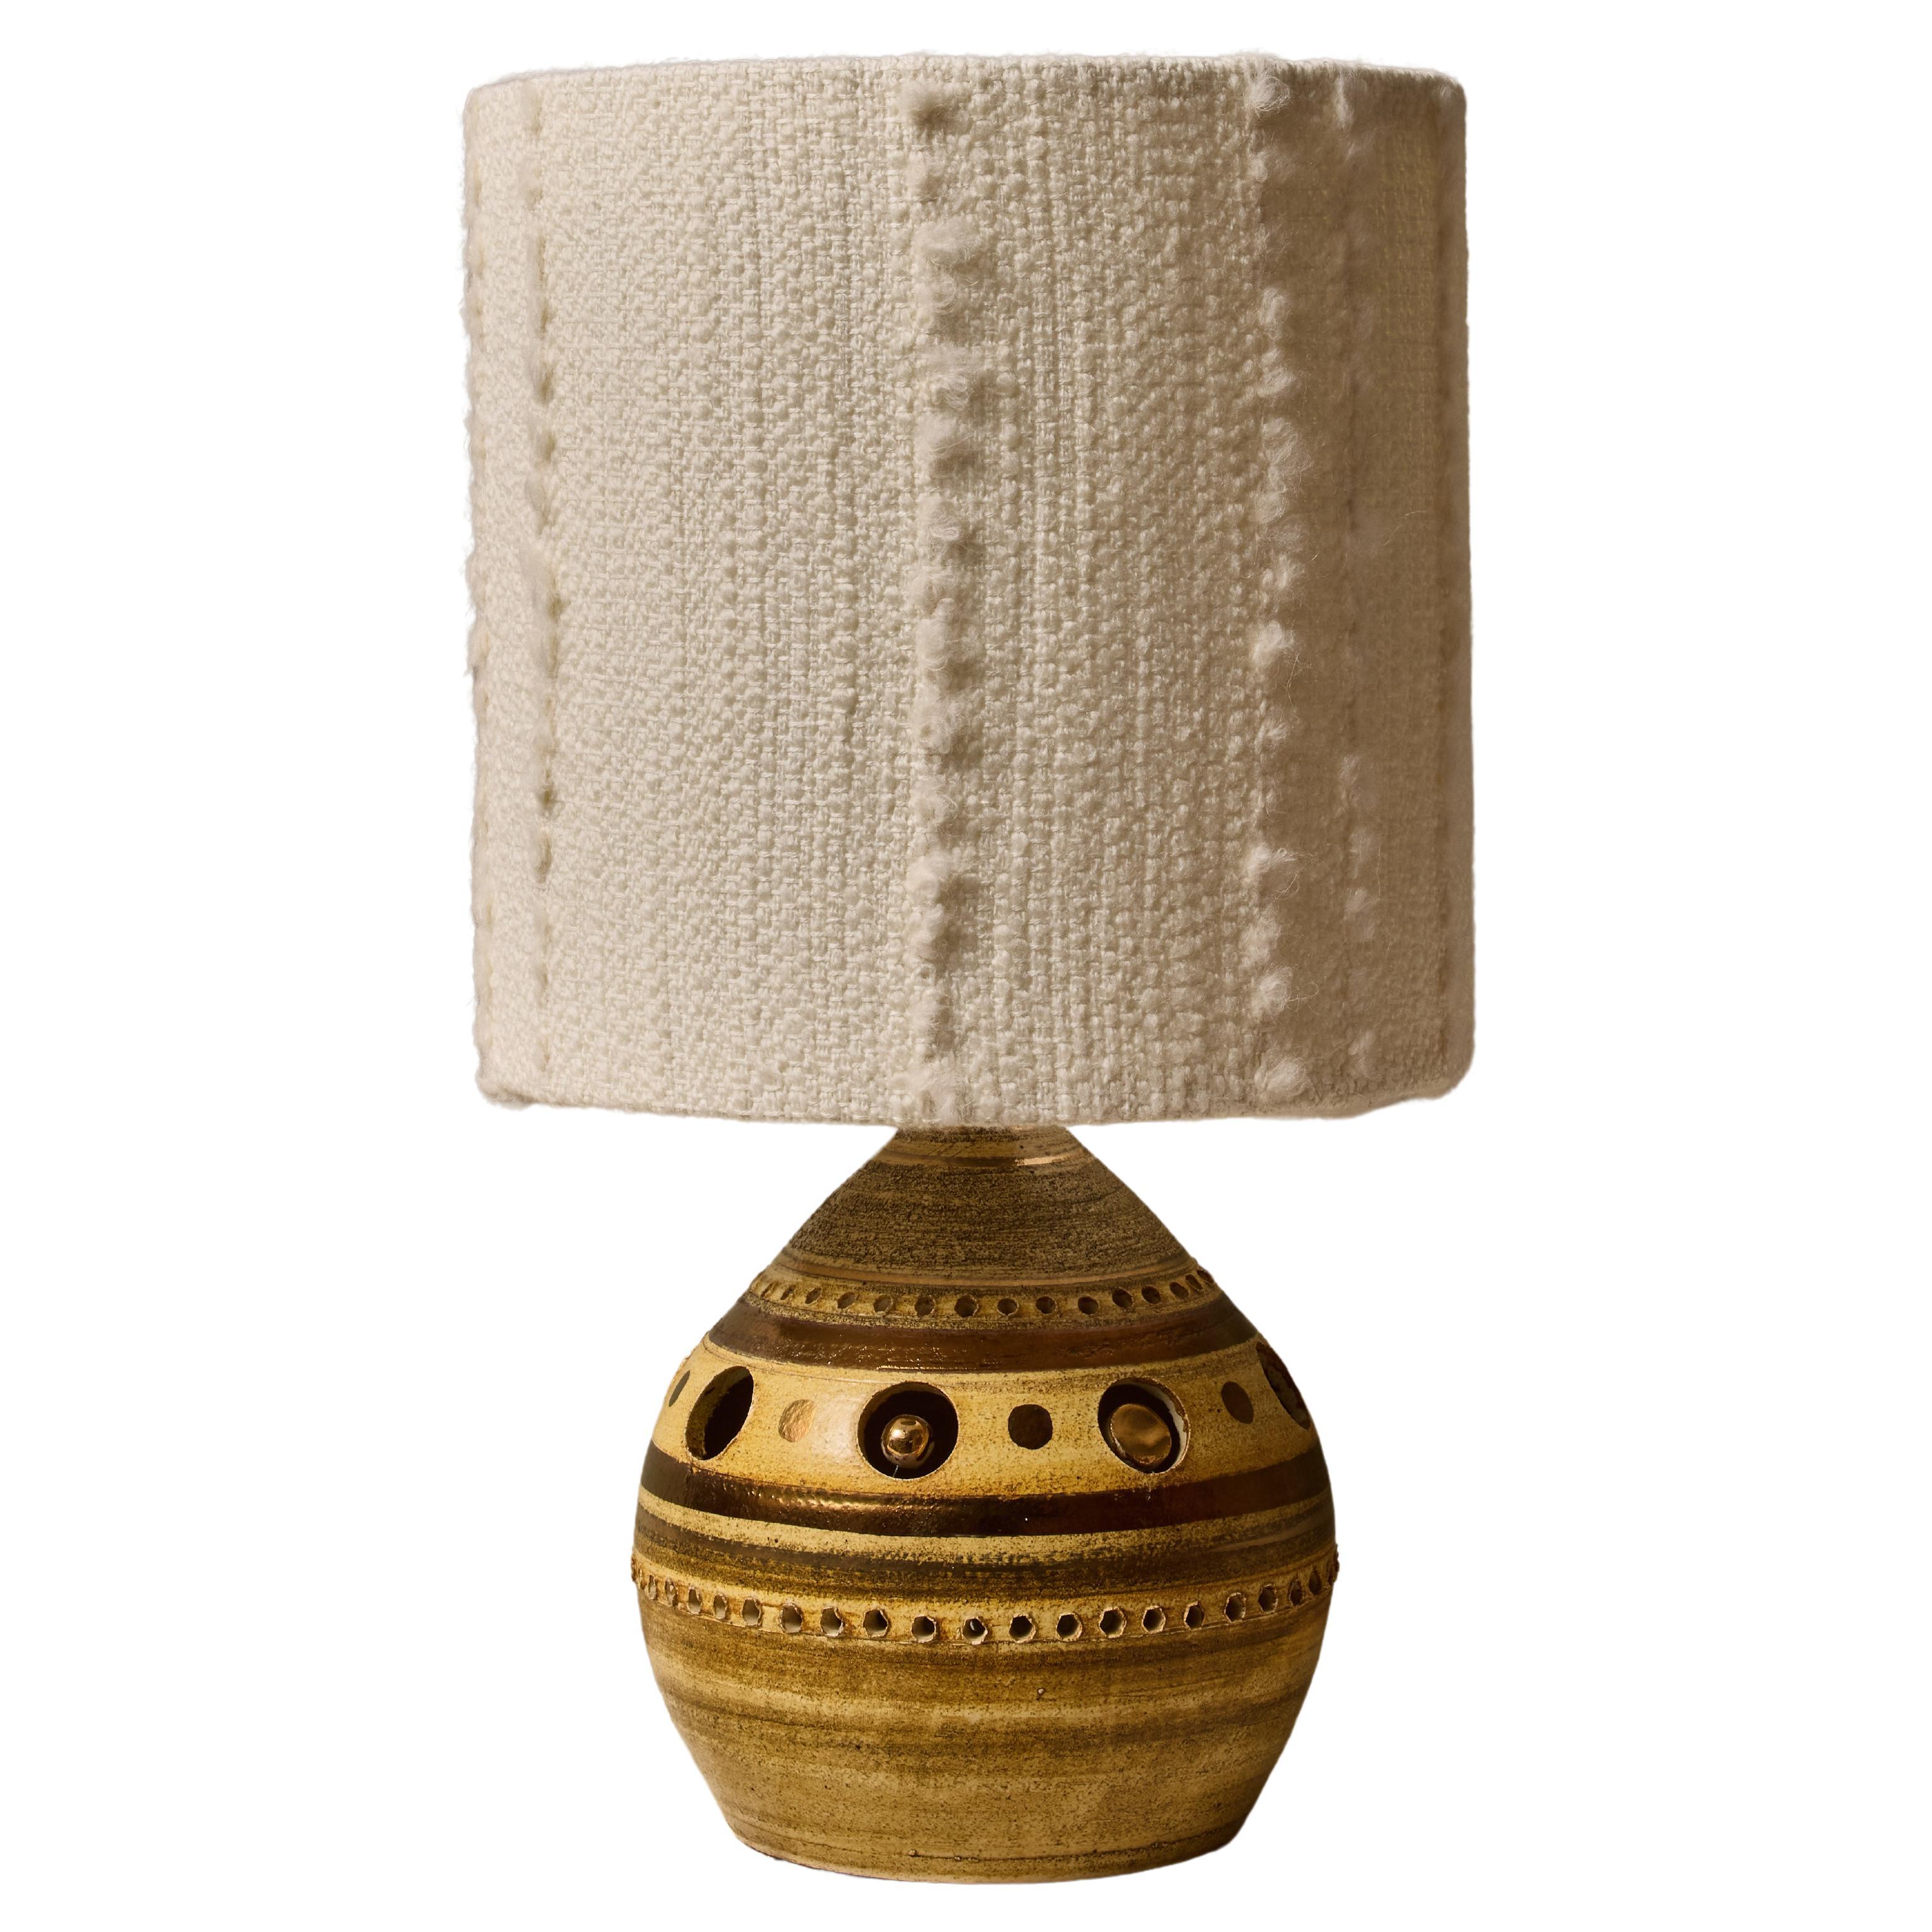 Georges Pelletier Green, Brown and Gold Glazed Round Ceramic Table Lamp